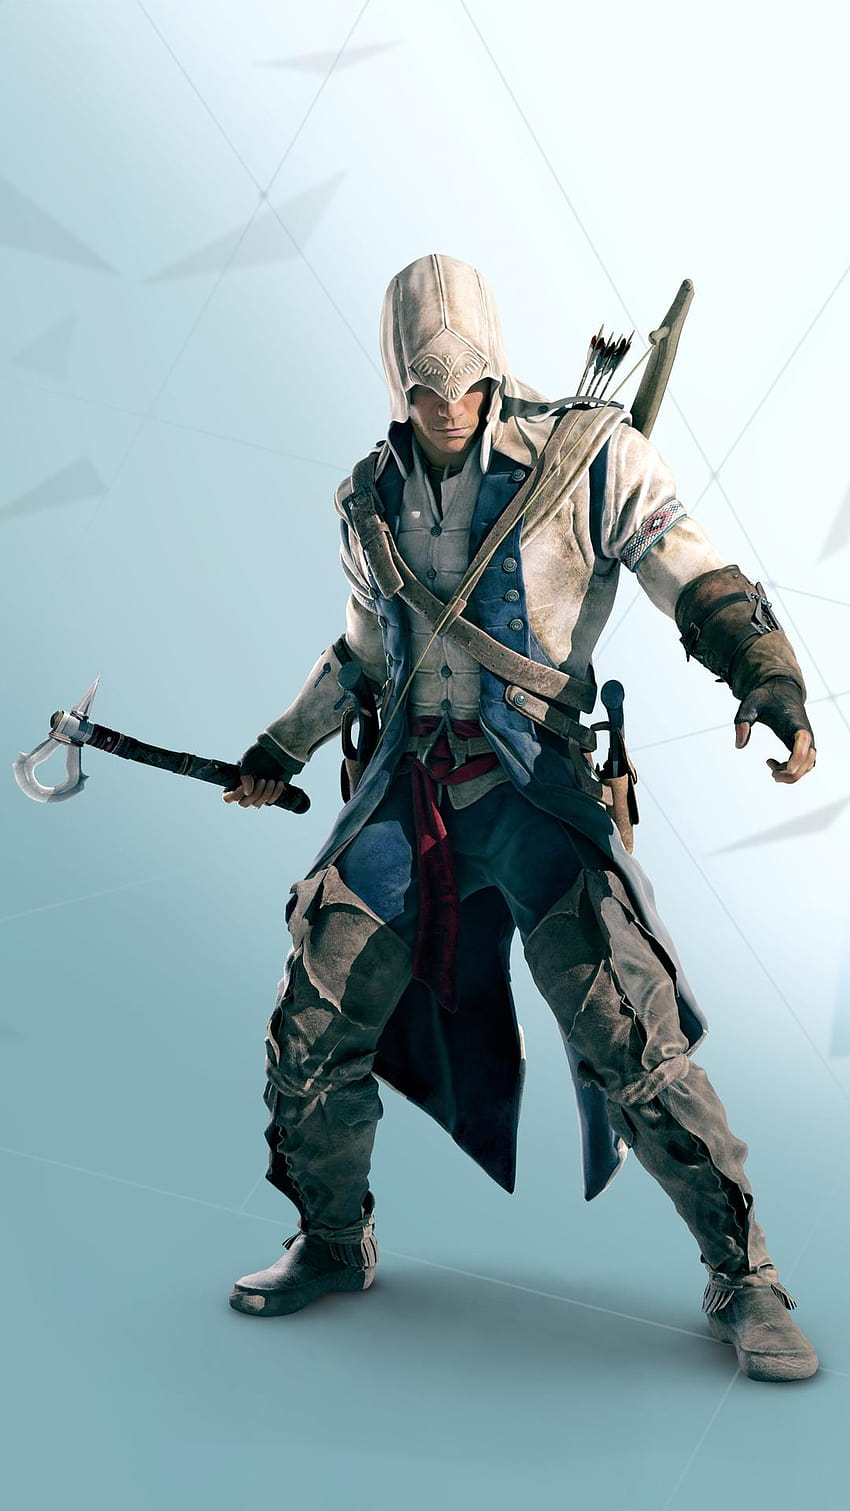 Assassins Creed 3 HTC one, assassins creed iii mobile HD phone wallpaper